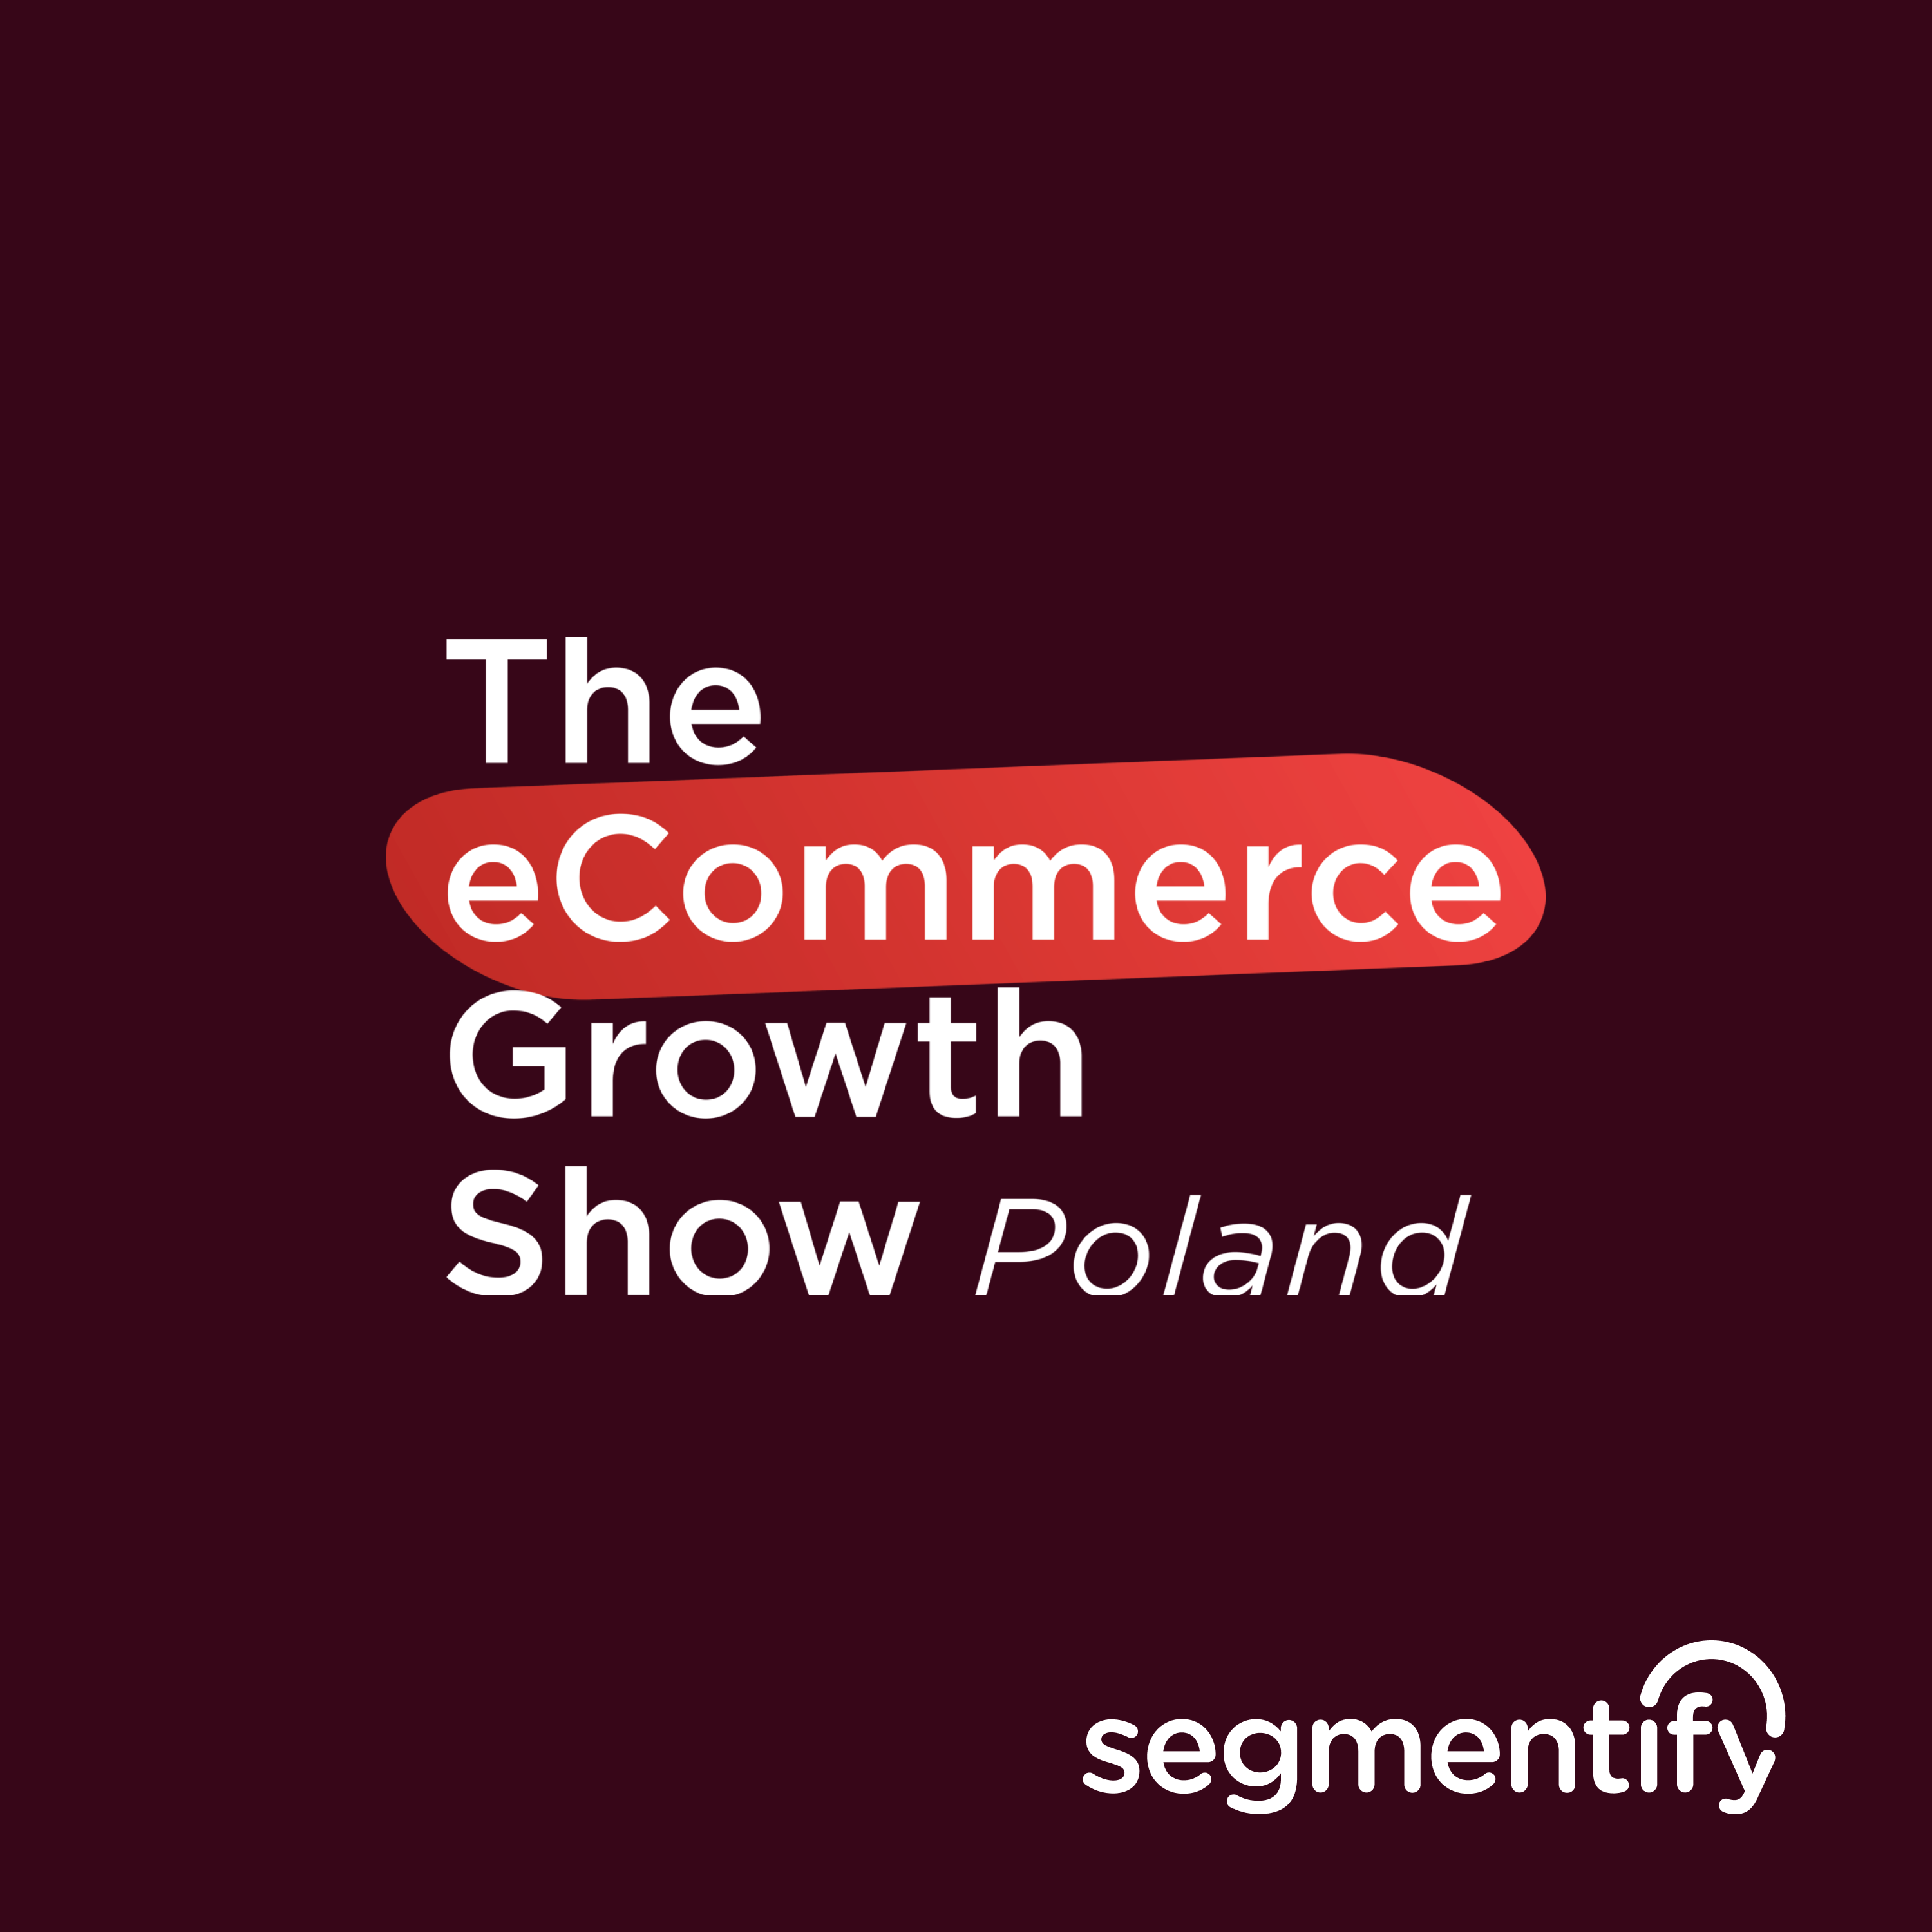 Artwork for The eCommerce Growth Show Poland